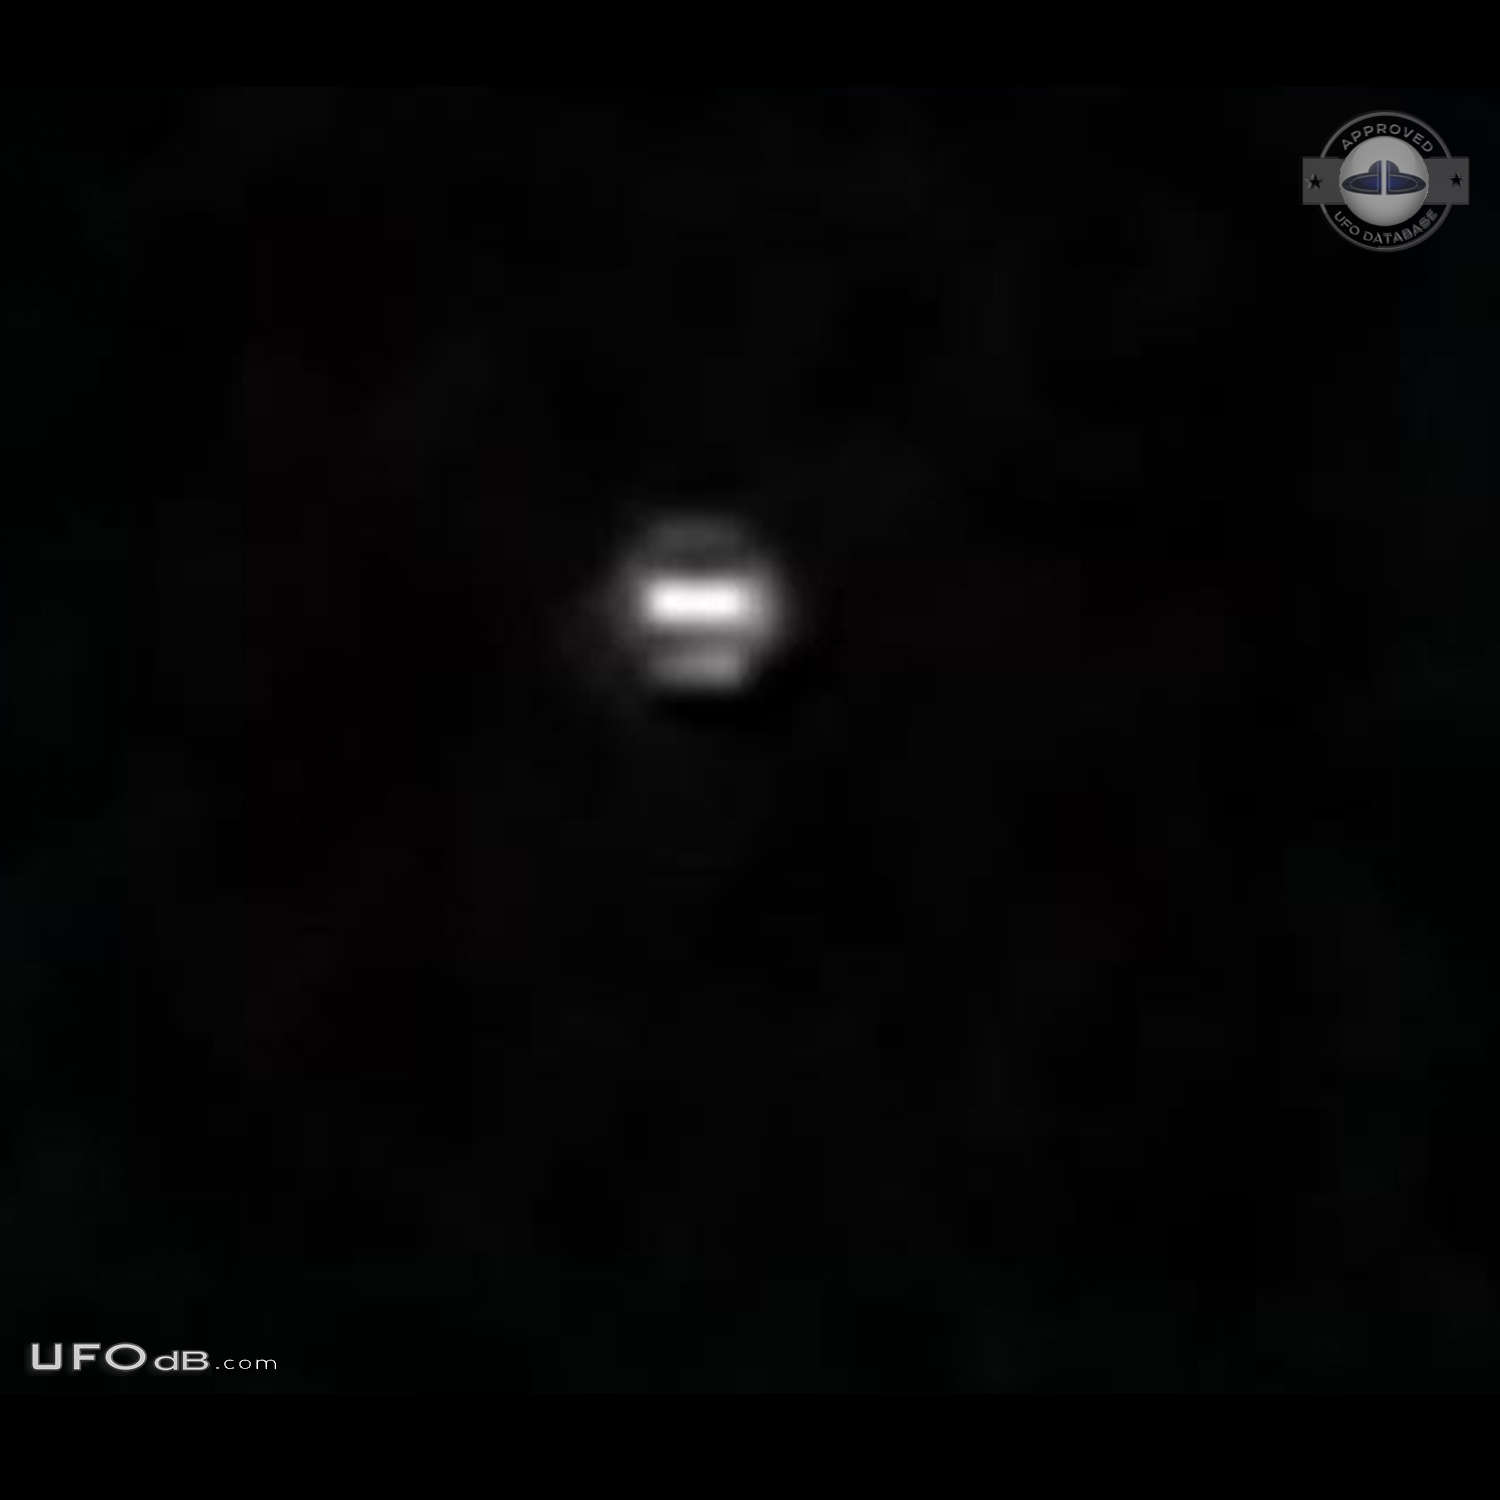 Airplane Passenger UFO sighting from Phoenix Bound Plan March 2015 UFO Picture #661-2